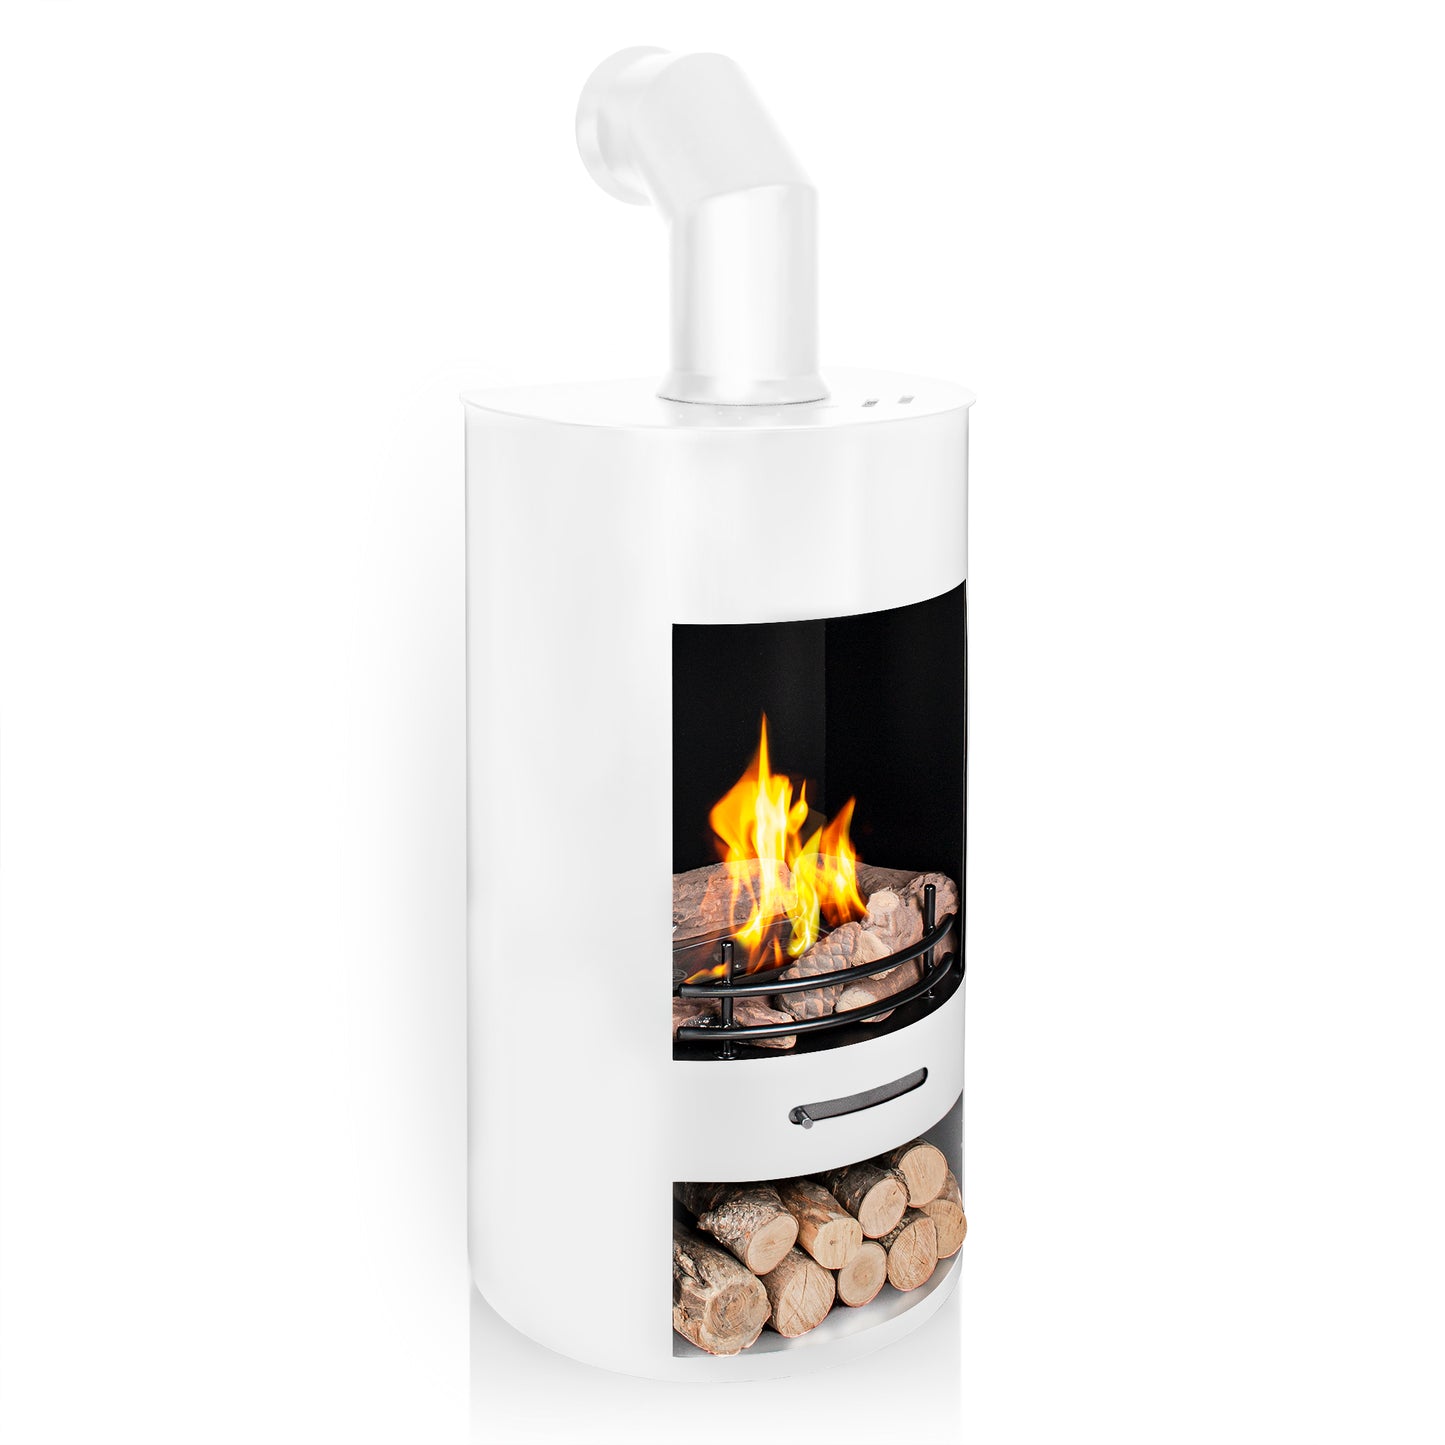 LUNA White Bioethanol Stove with pipe